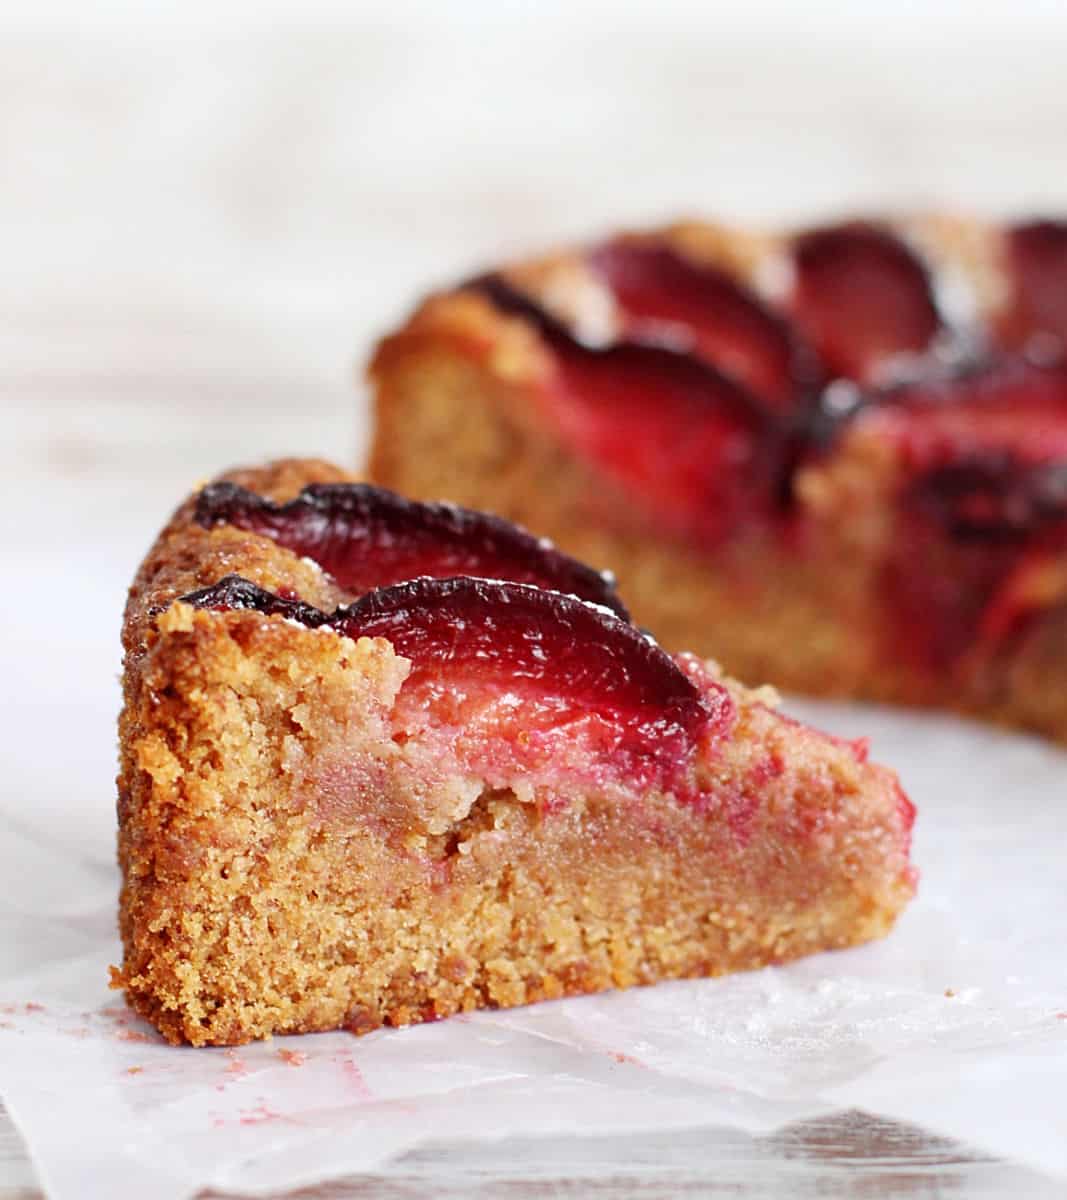 Slice of almond plum cake on white surface, rest of cake in background.